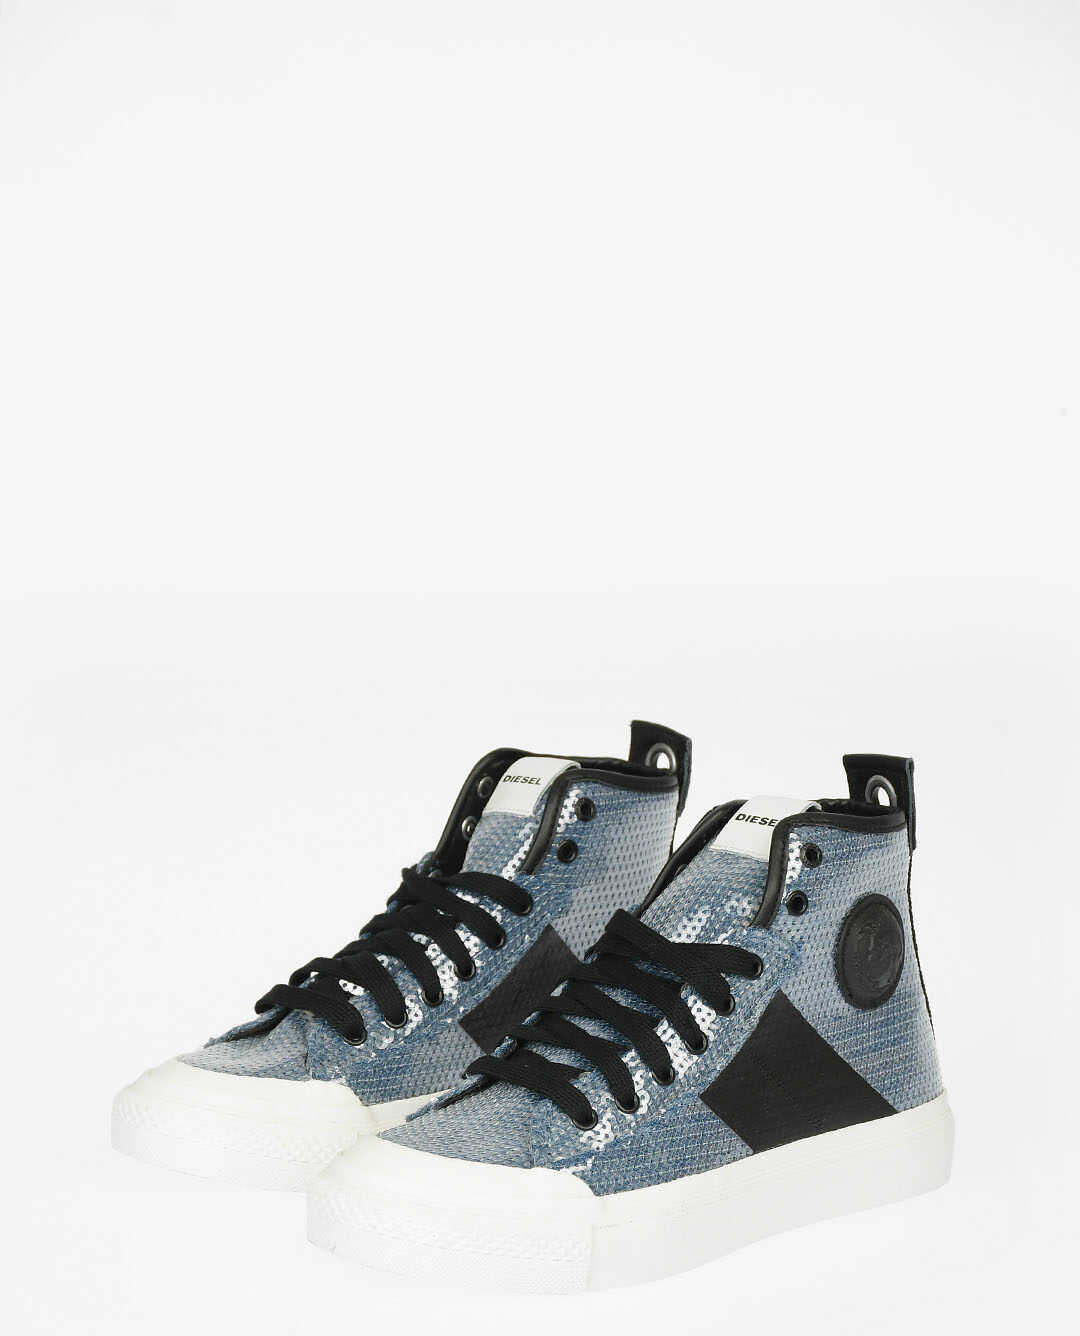 Diesel Fabric Sequined S-Astico Sneaker* BLUE